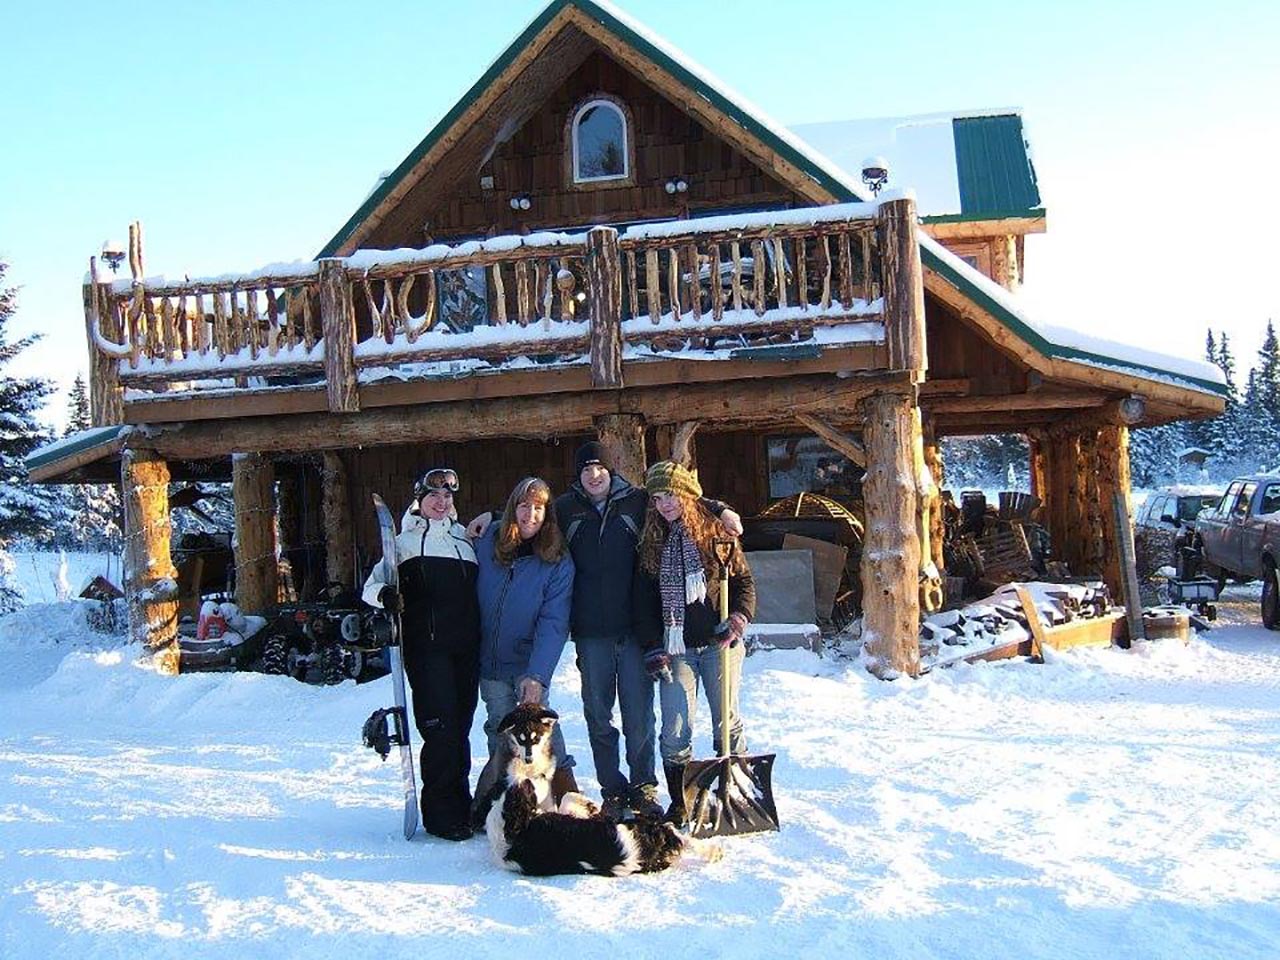 Group in front of the B&B in winter.